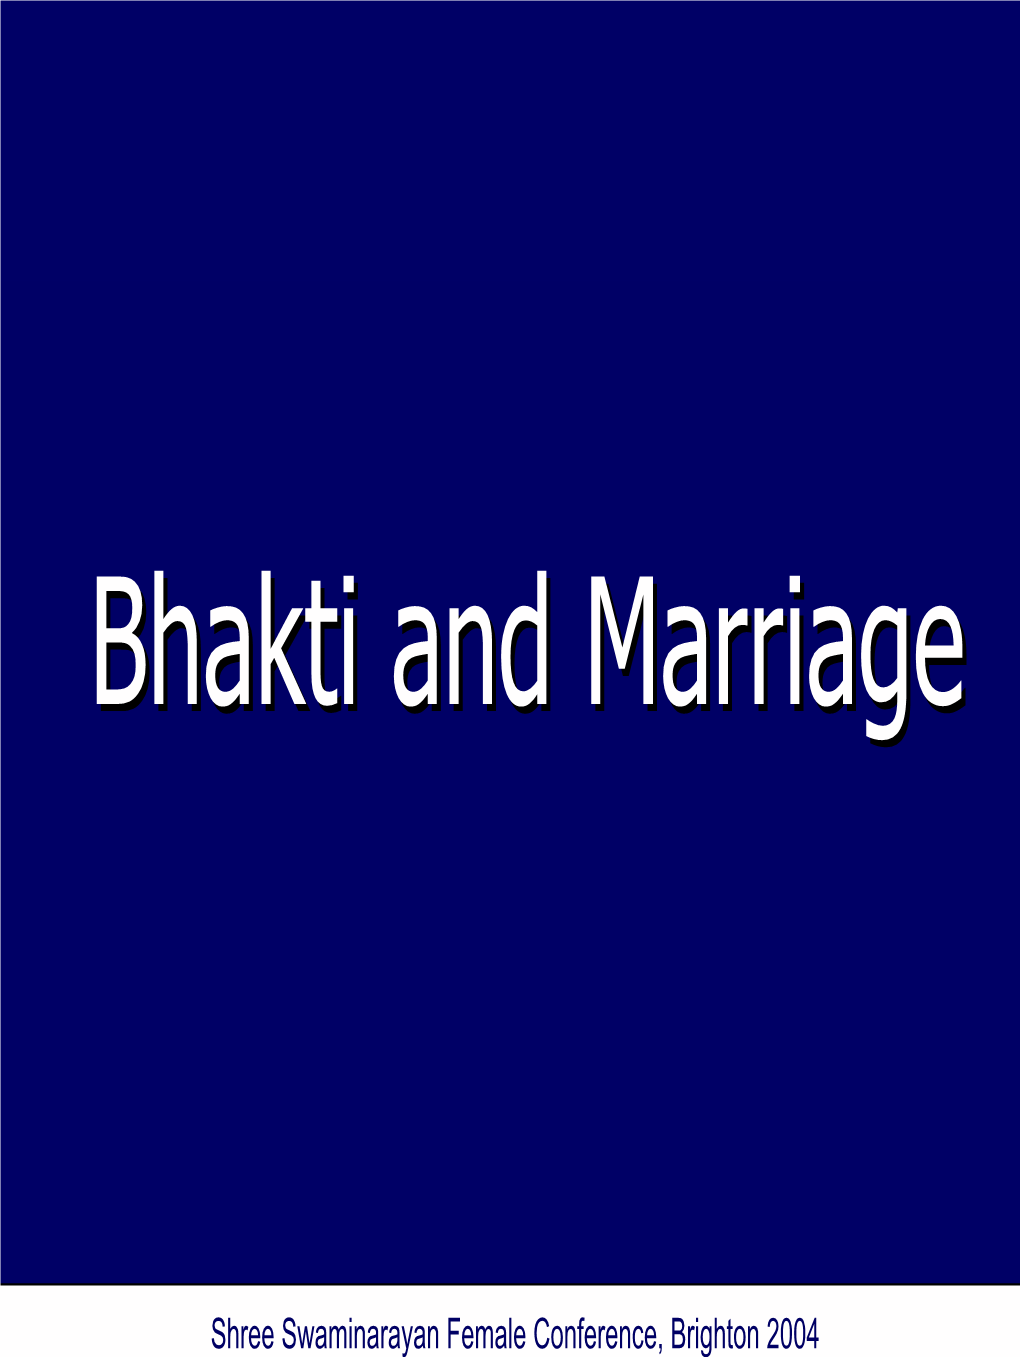 Bhakti and Marriage